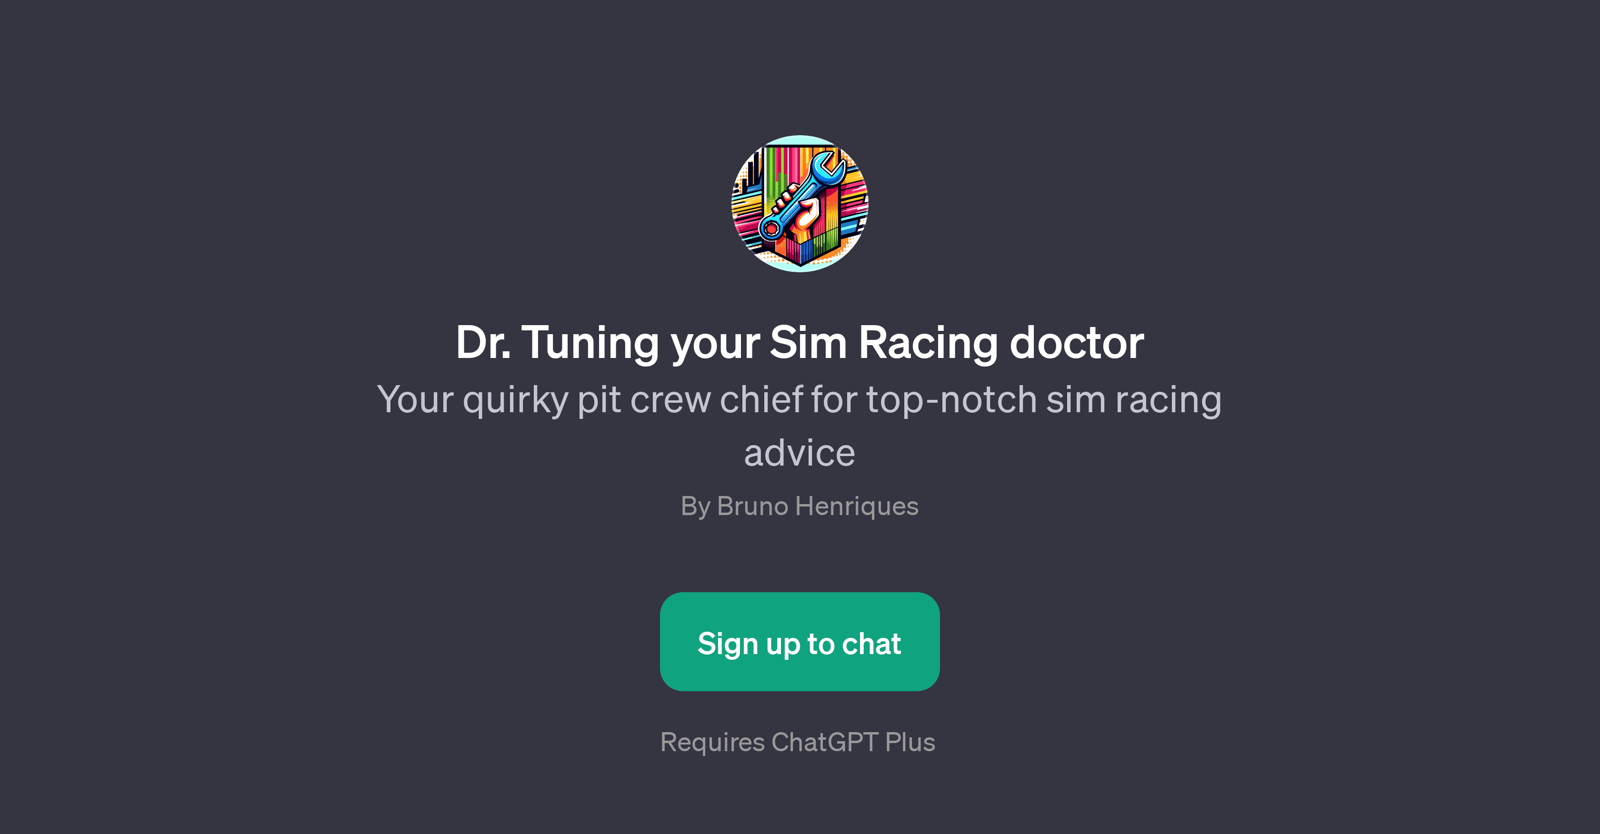 Dr. Tuning your Sim Racing doctor website